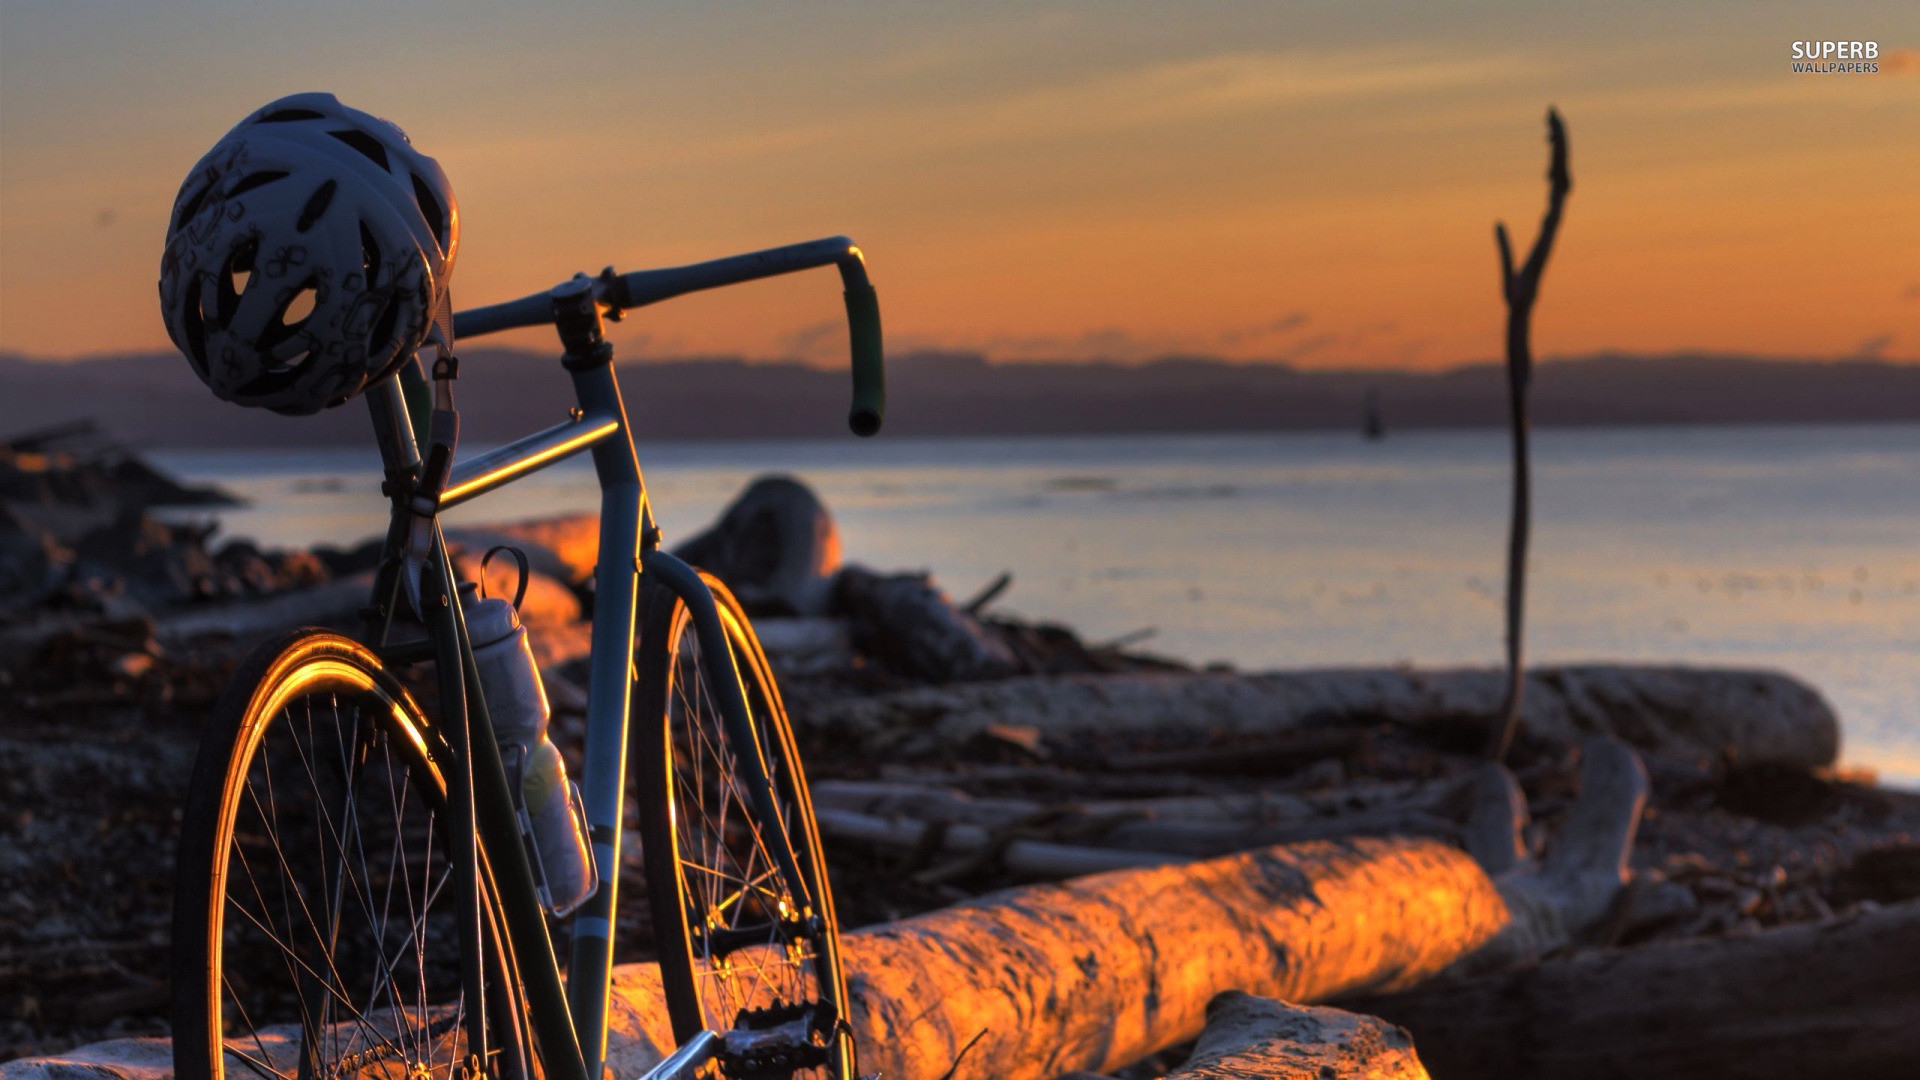 1920x1080 Bicycle In The Sunset Wallpaper 